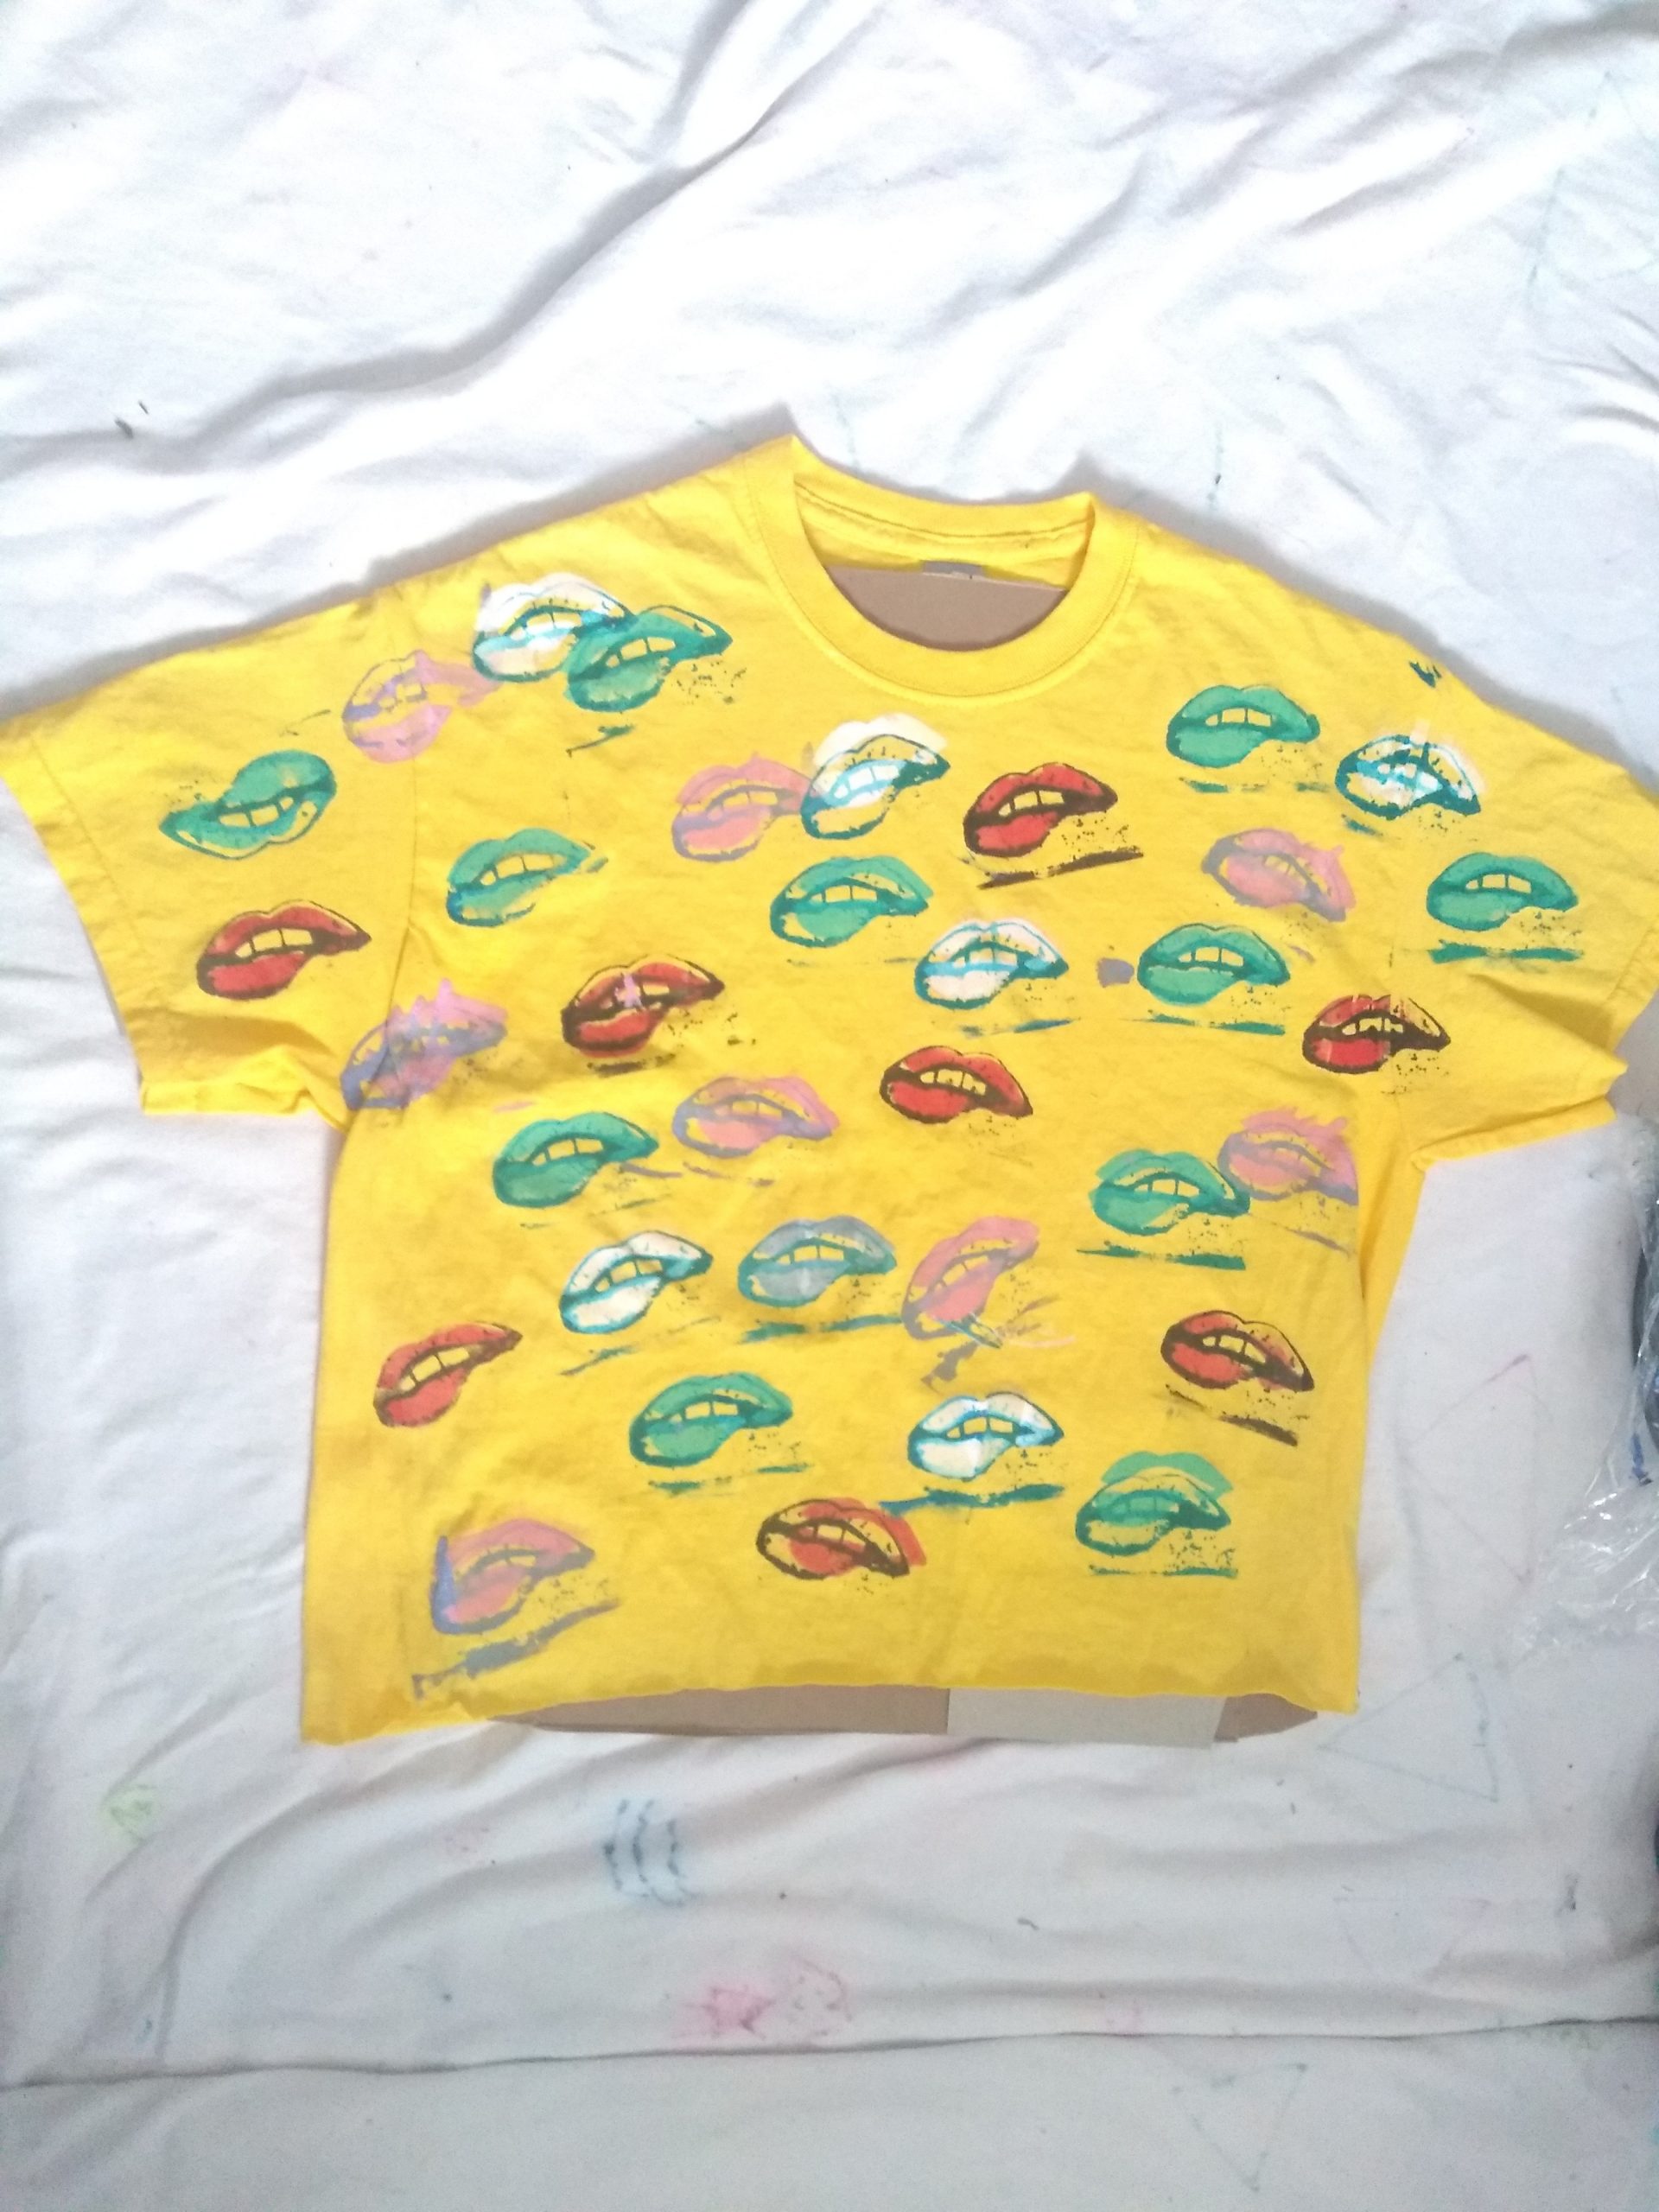 Yellow crop top with mouths with lower lip bites all over